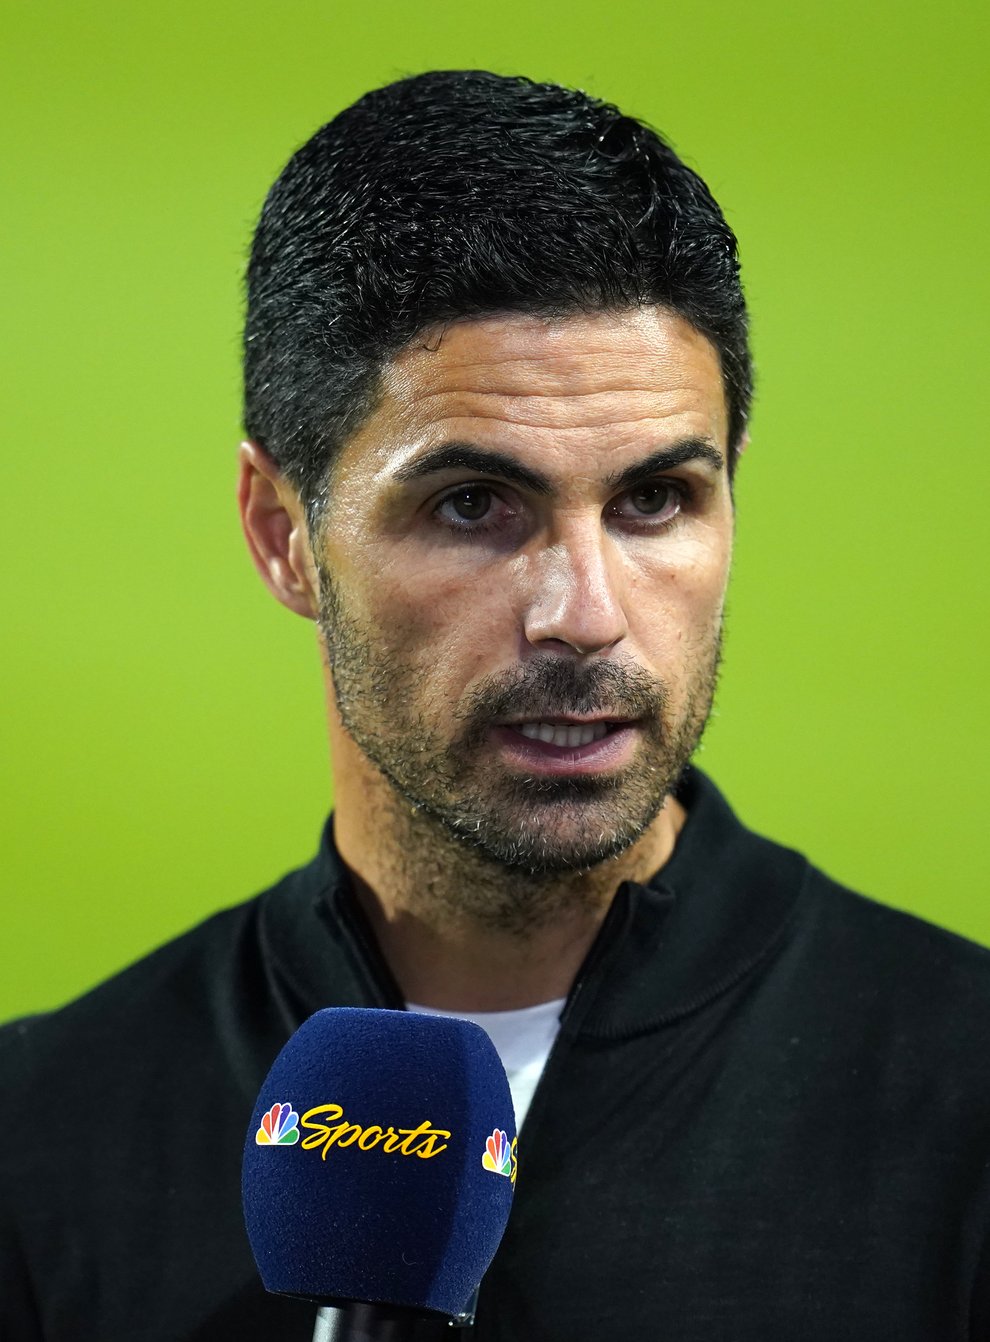 Mikel Arteta says he is fully focused on Arsenal’s trip to Newcastle (Nick Potts/PA)